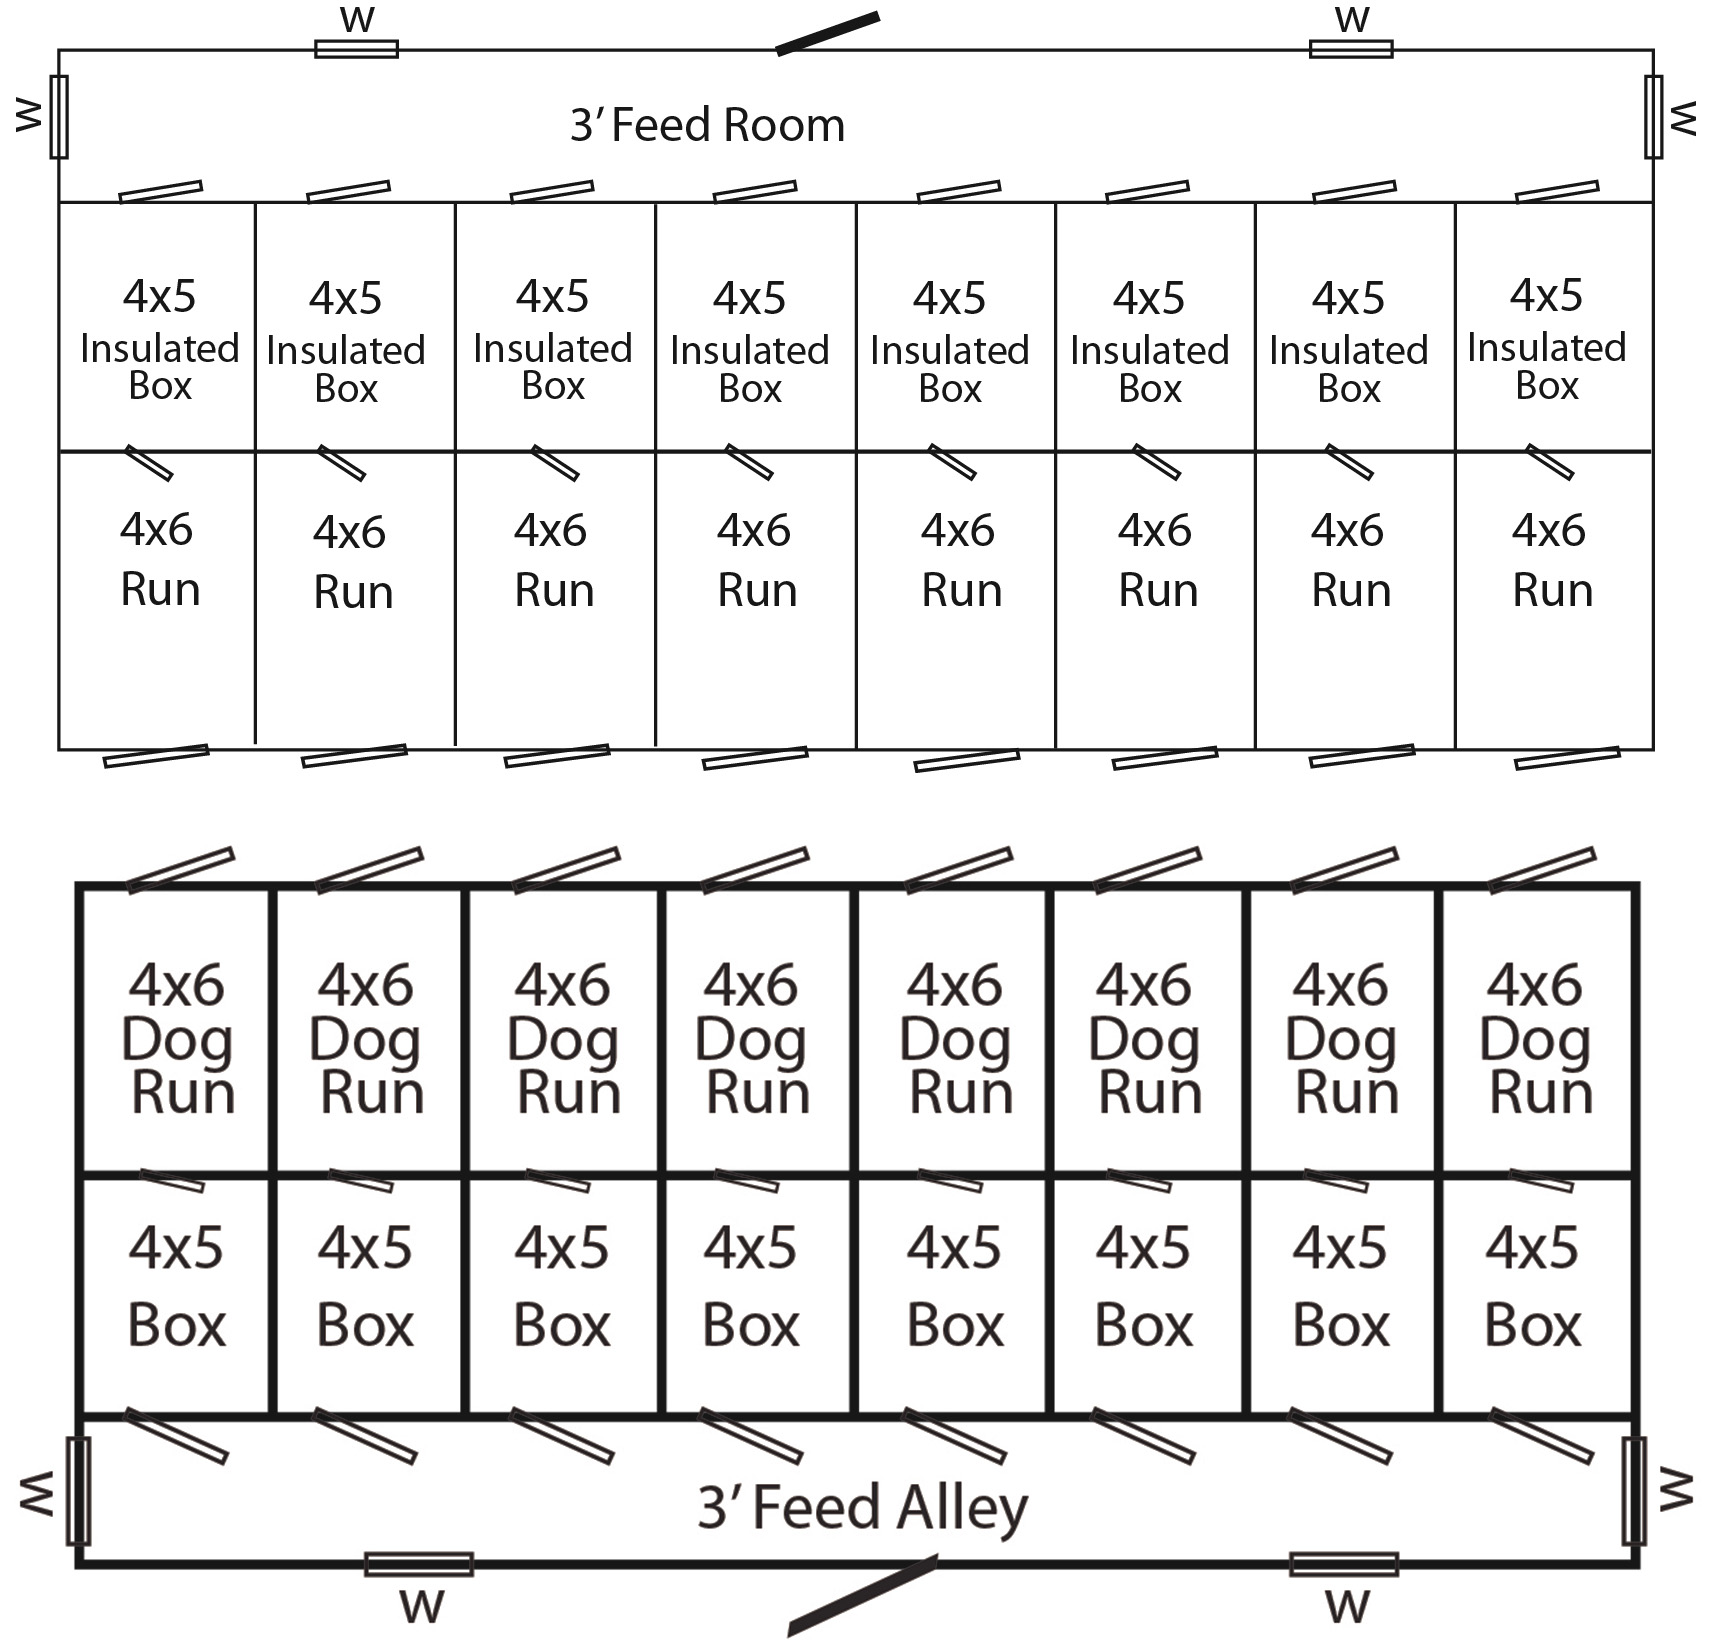 Floorplan of 2 14x32 commercial kennels with 8 dog runs each.